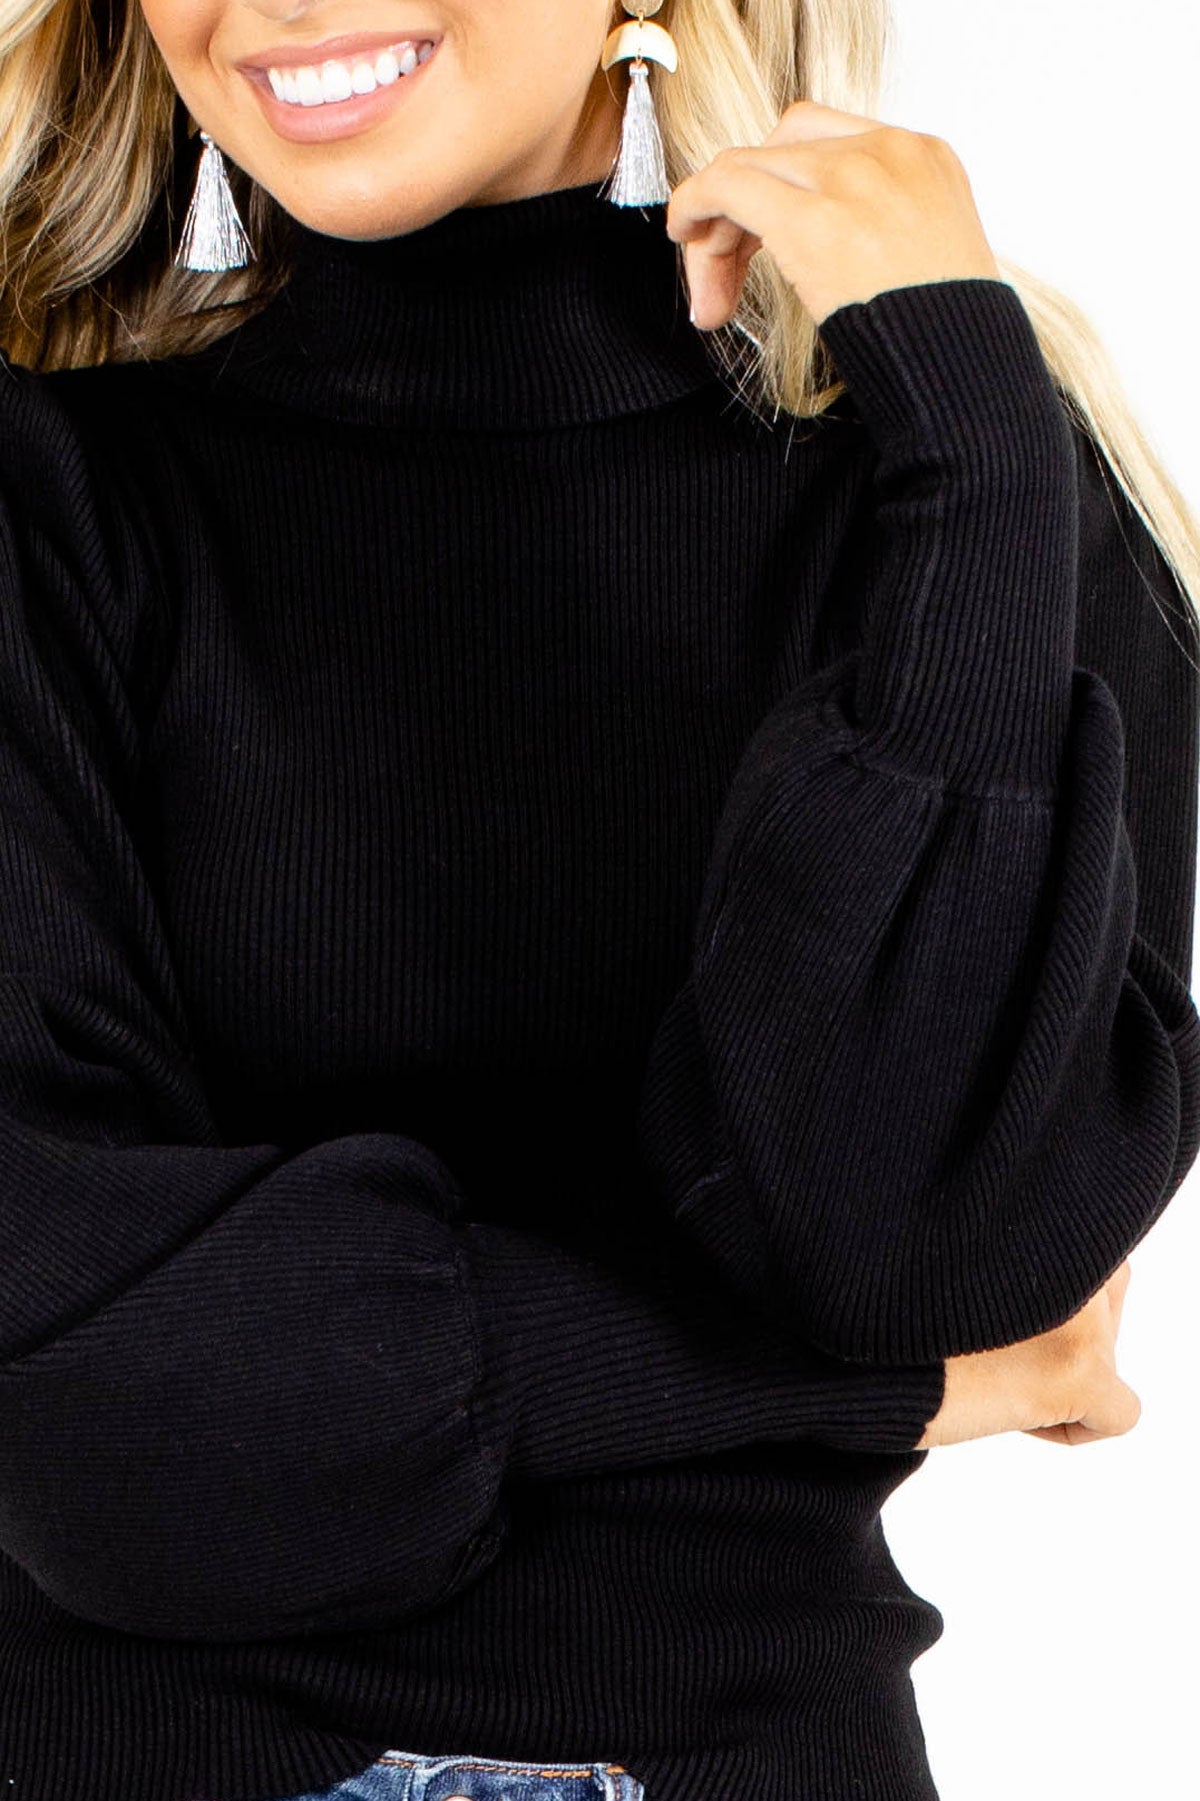 Black Stretchy Sweater Top Boutique Styles